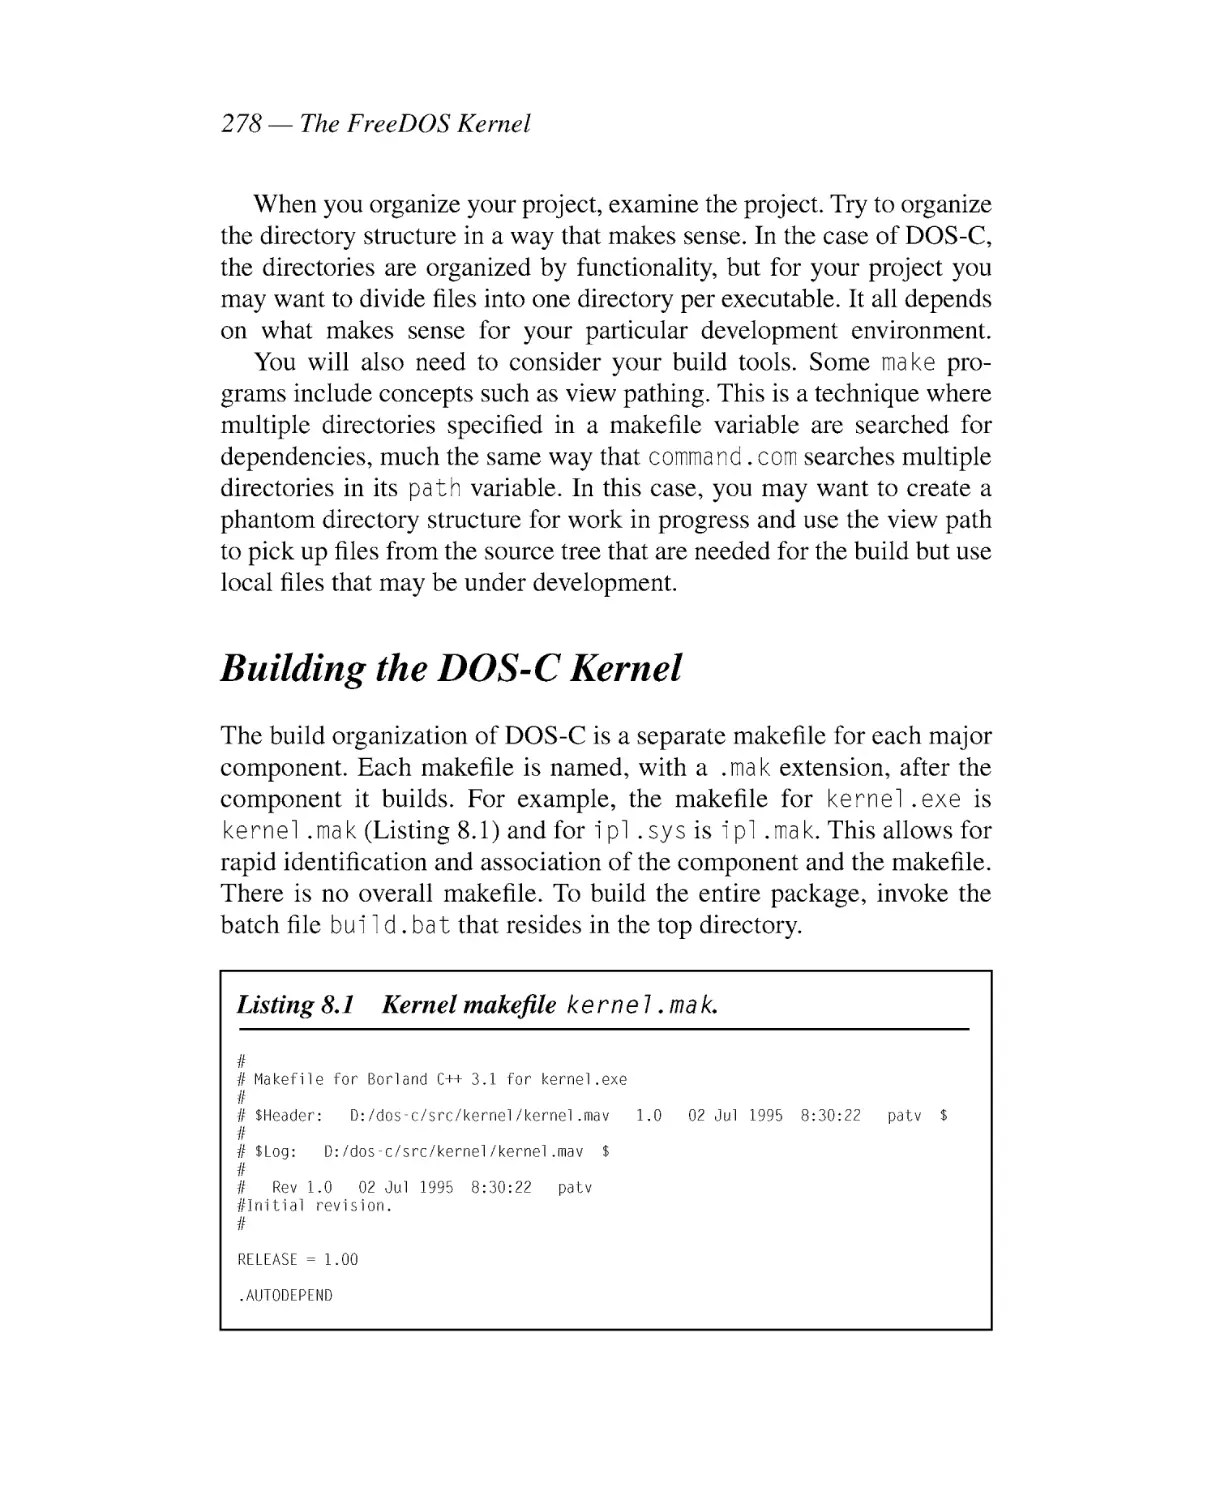 Building the DOS-C Kernel